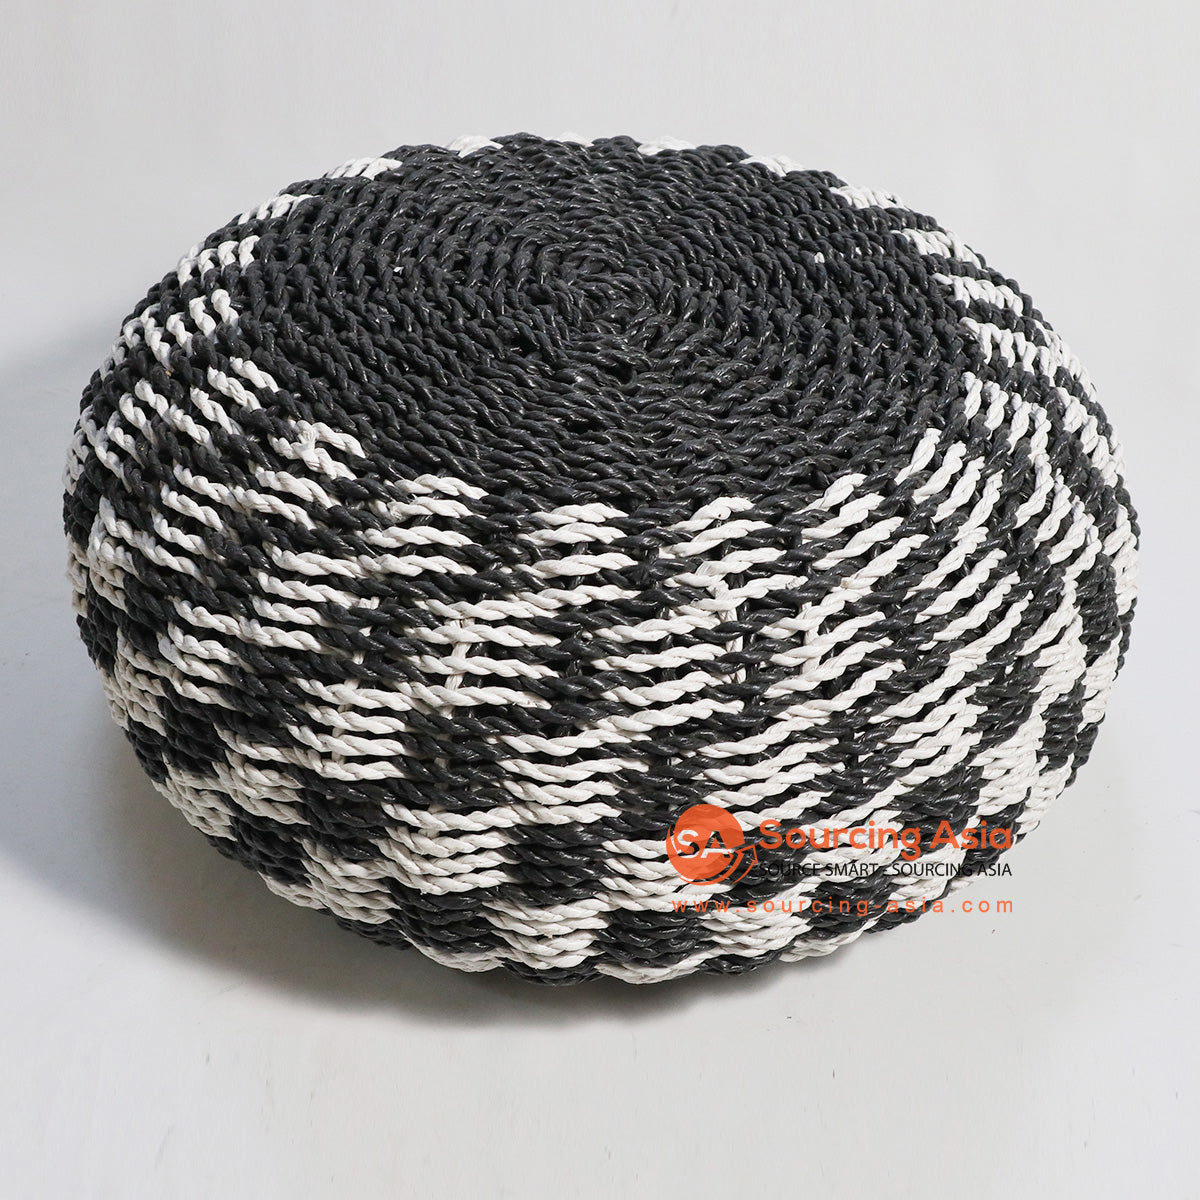 HBSC142-1 BLACK AND WHITE SYNTHETIC FOOT POUFFE